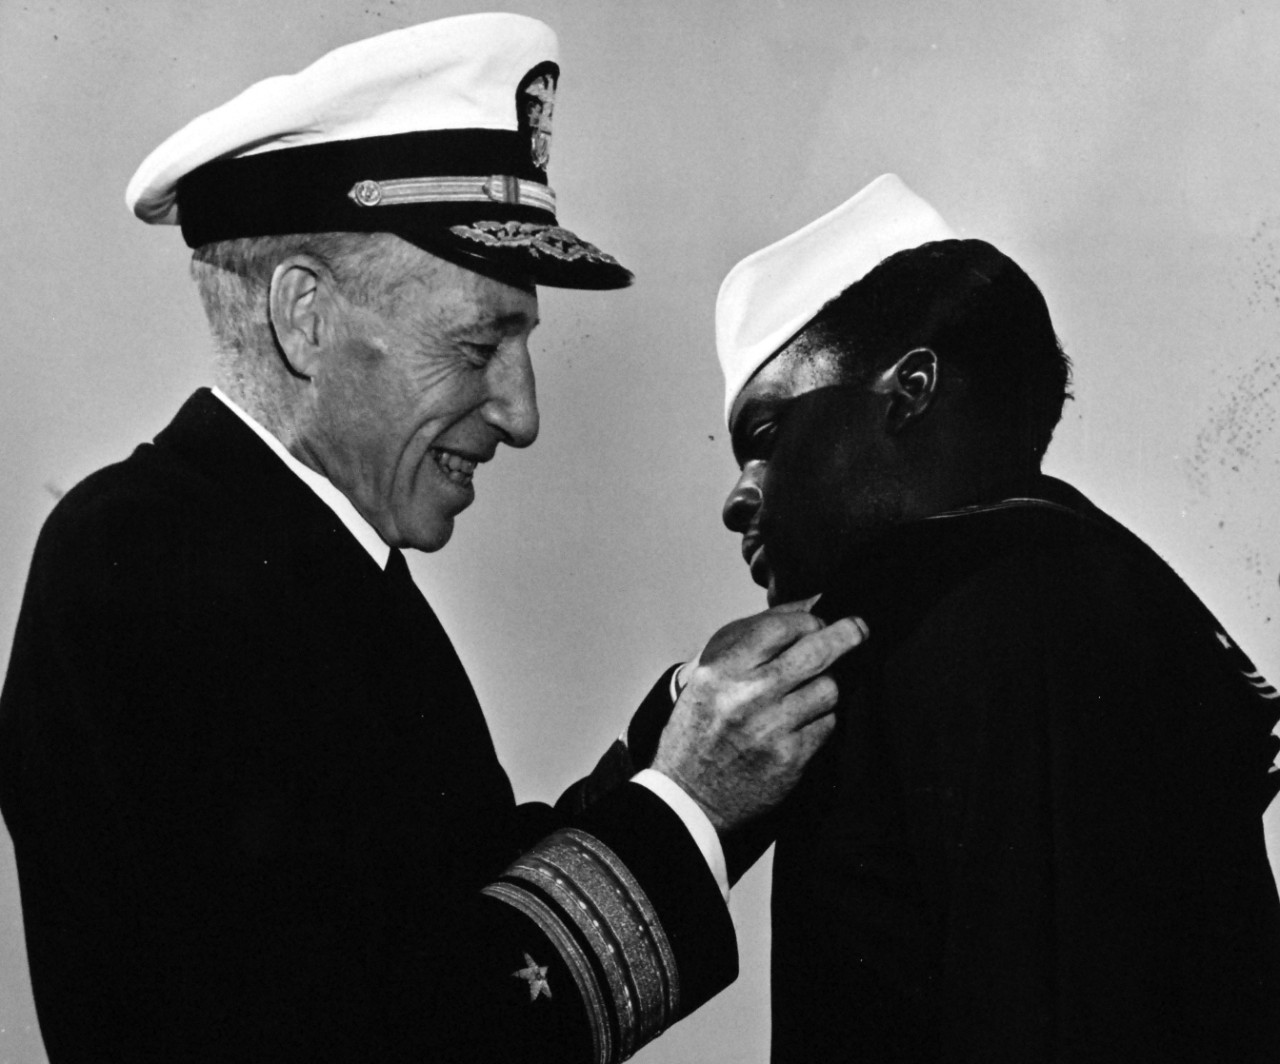 80-G-47281:  Seaman First Class James A. Camper, USNR, 1944.  Rear Admiral Carleton H. Wright presenting the Navy and Marine Corps Medal to Seaman First Class James A. Camper, USNR.  Received the medal for risking his life to bring flames under control during the Port Chicago Magazine, California, explosion and fire.    Photograph filed December 9, 1944. Official U.S. Navy photograph, now in the collections of the National Archives.   